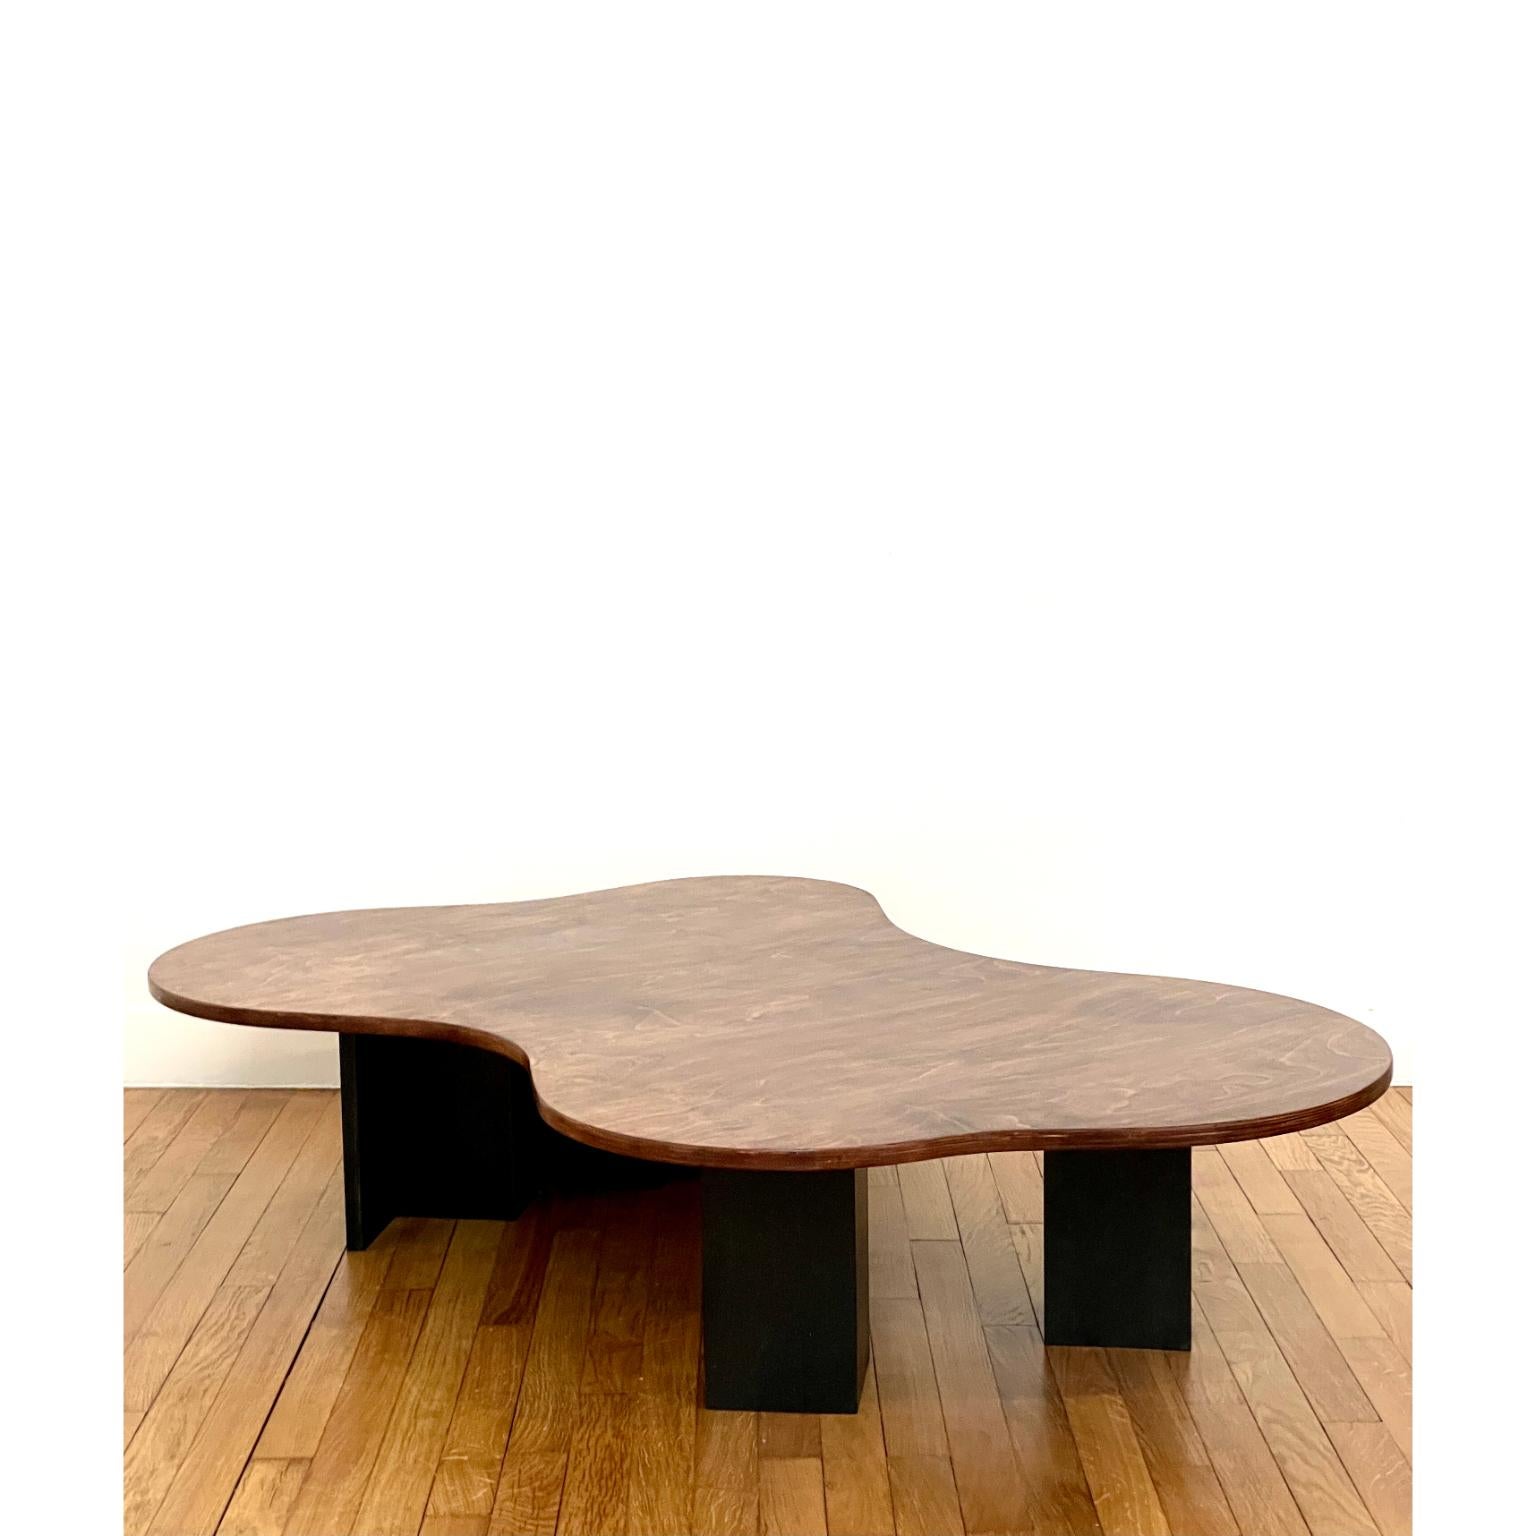 Other Unique Spill Table by Goons